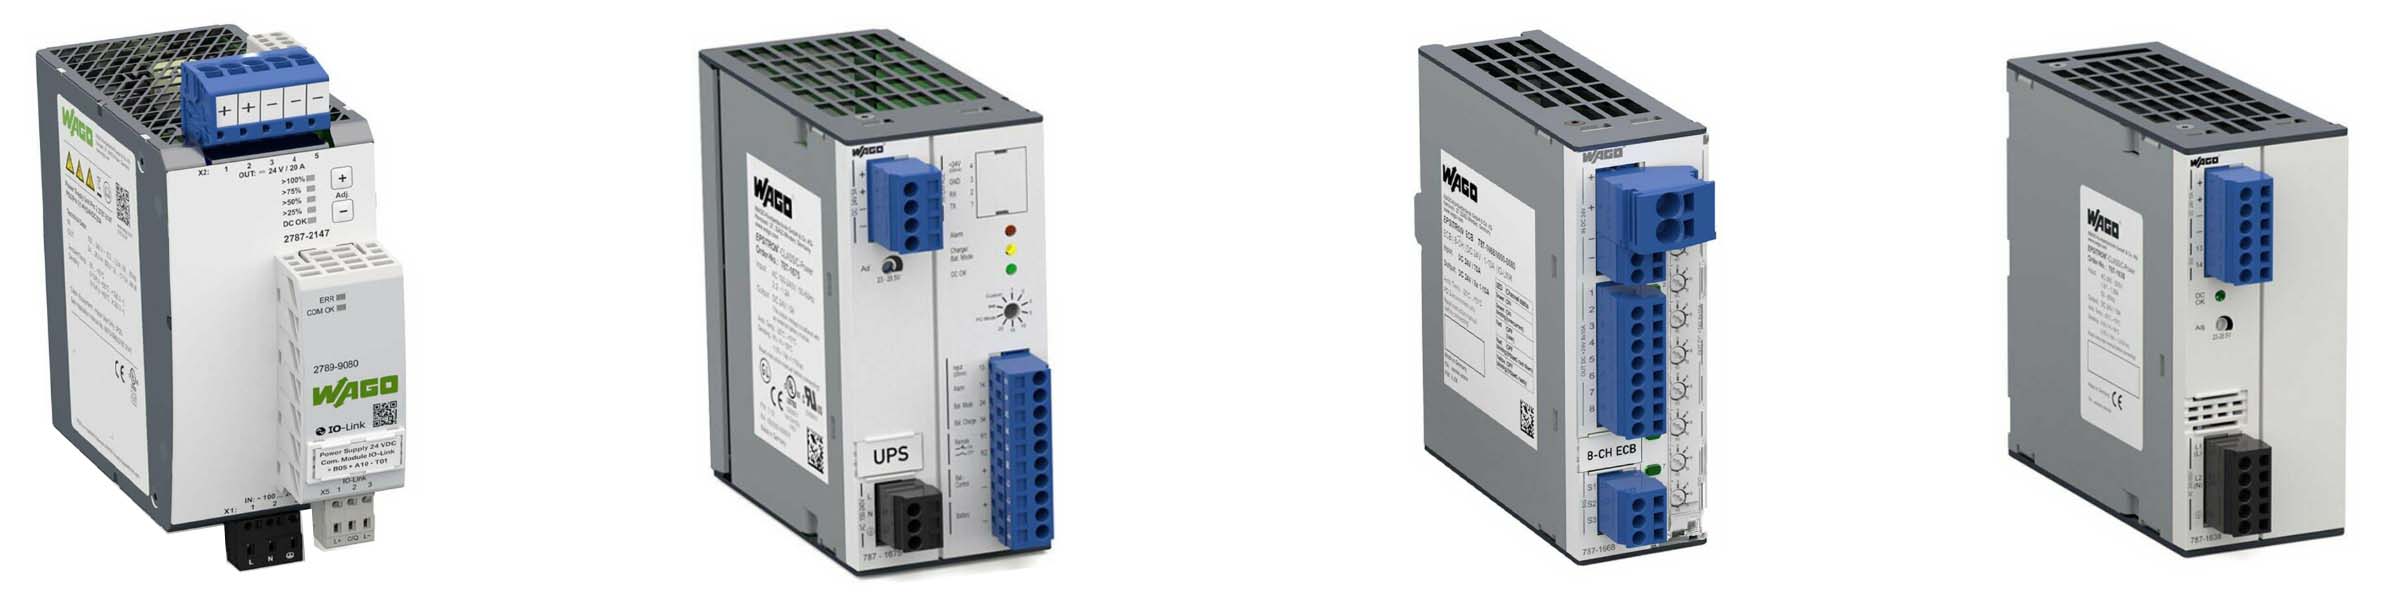 Power Supplies, UPS, and Electronic Circuit Breakers